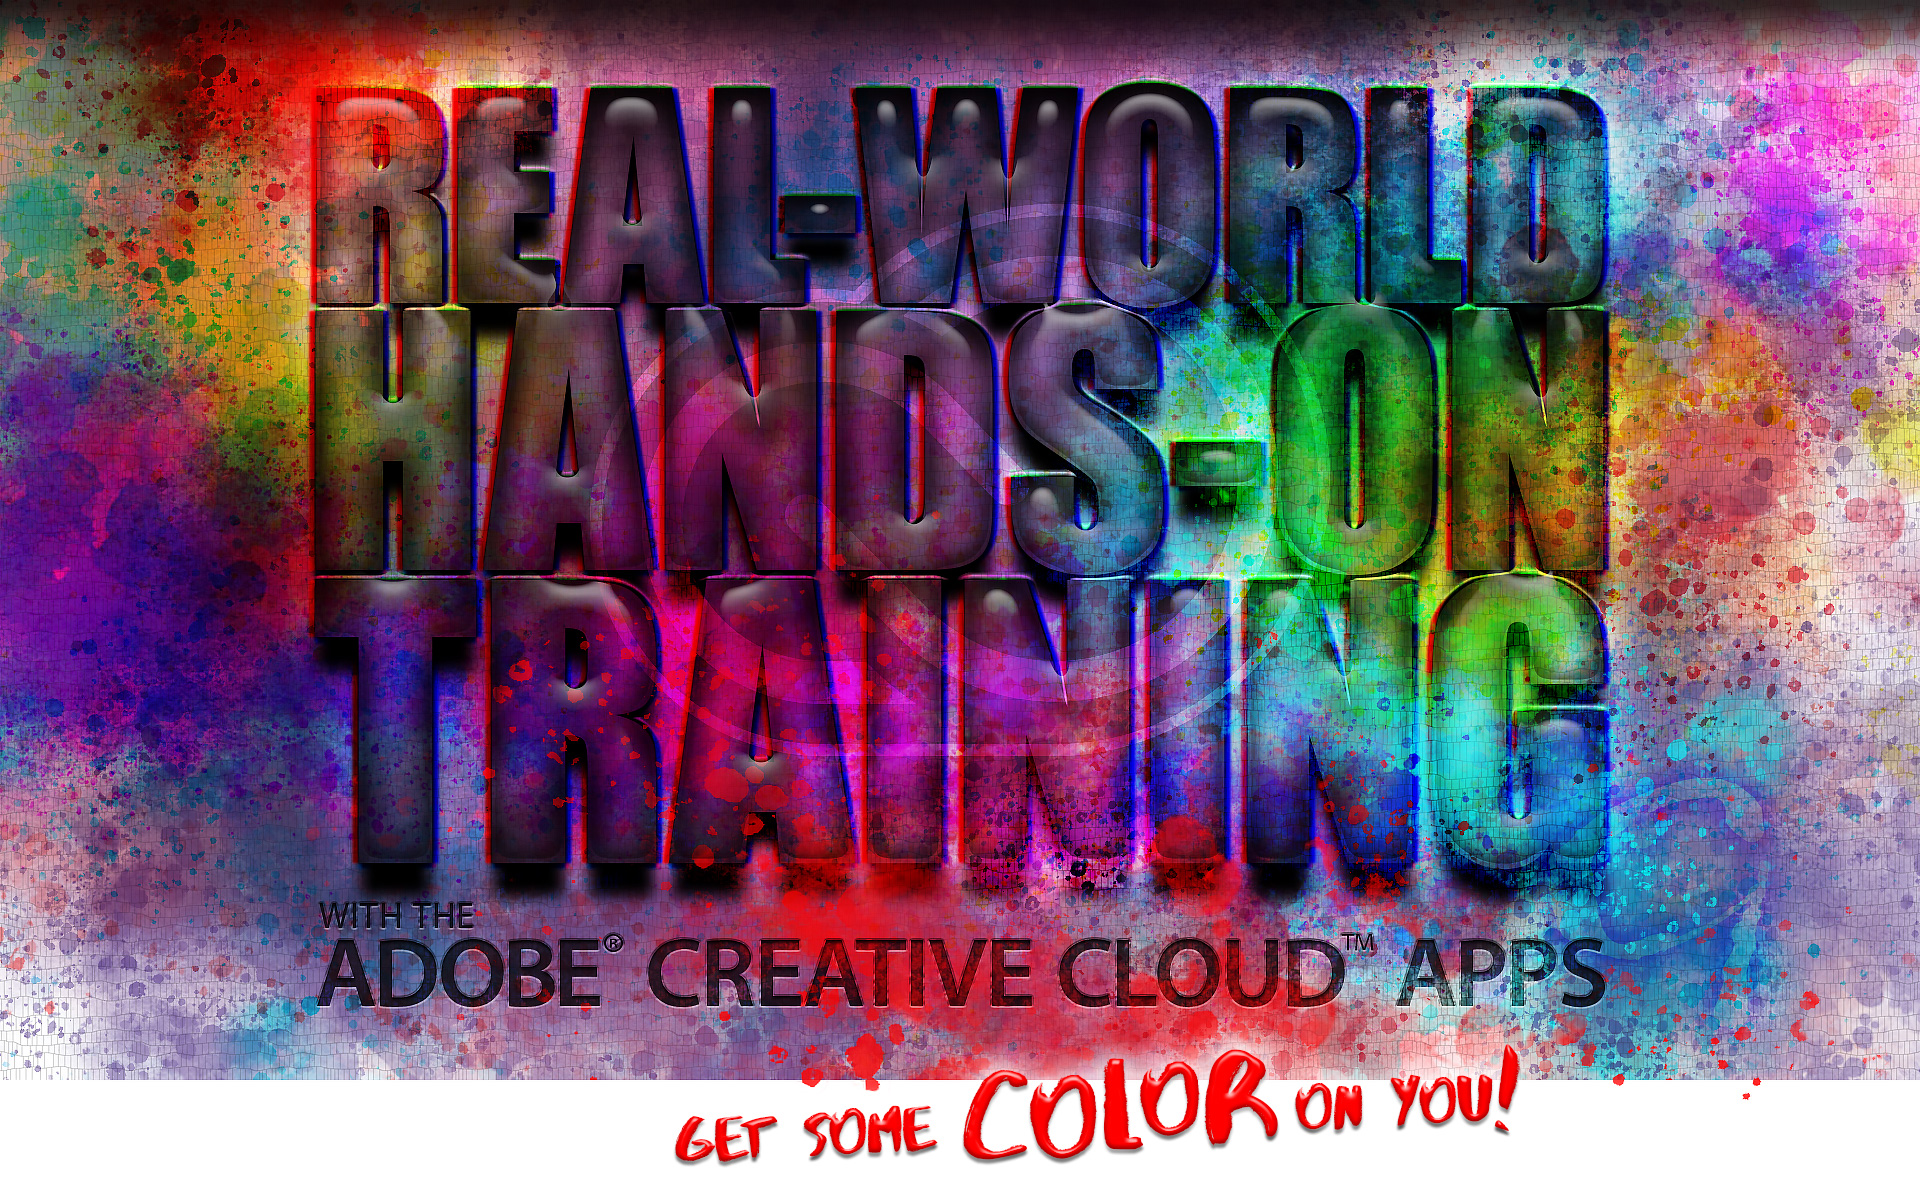 Real-World, Hands-on training with the Adobe® Creative Cloud™ Apps. Get some color on you.